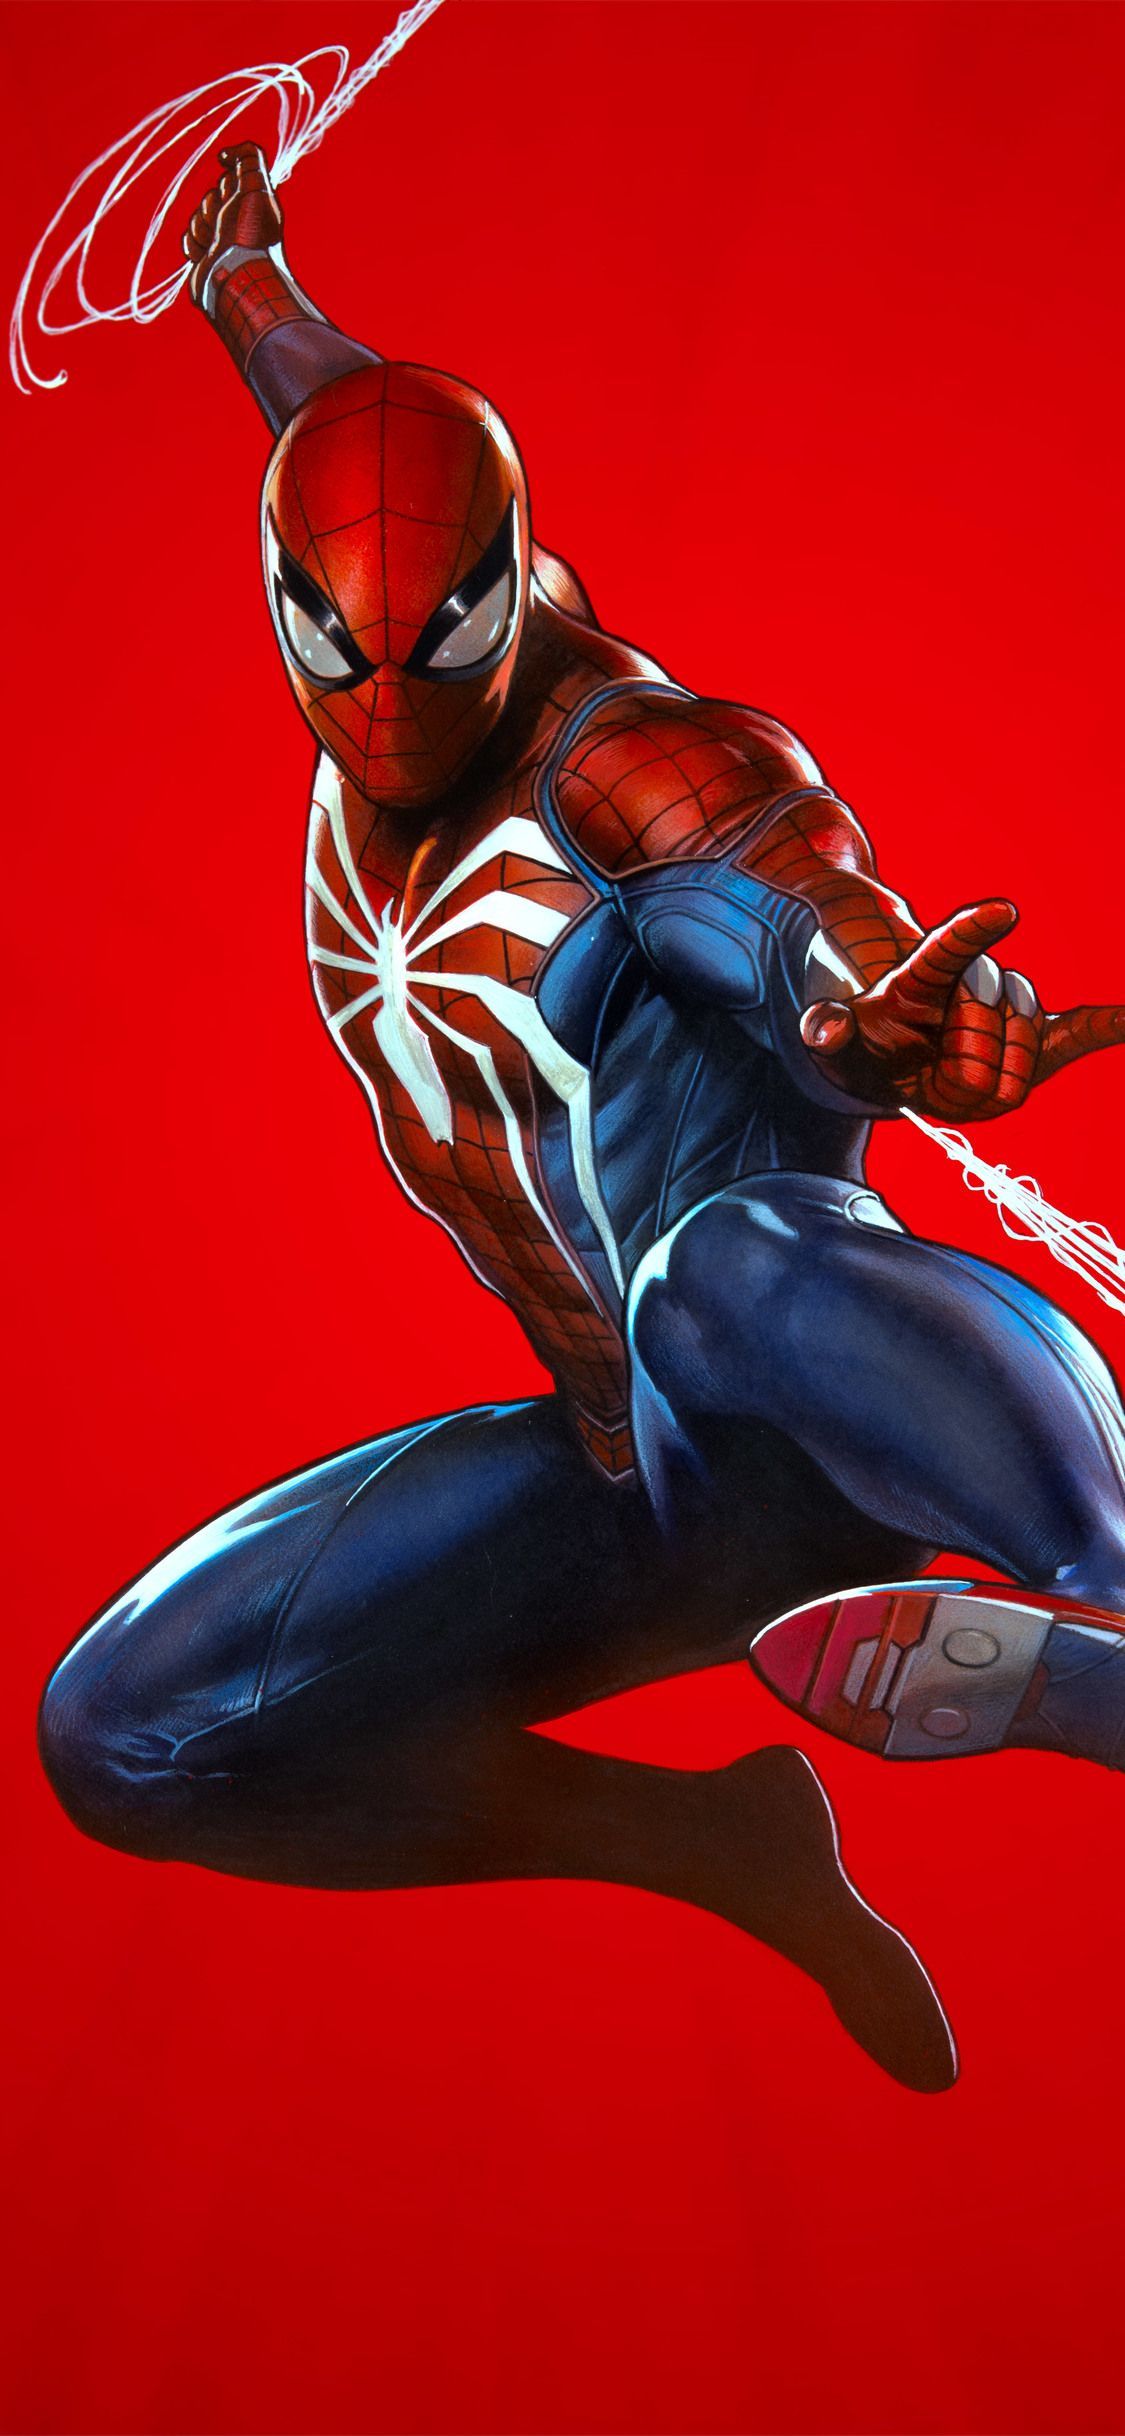 PS4 Spider Man IPhone Wallpaper Free PS4 Spider Man IPhone Background